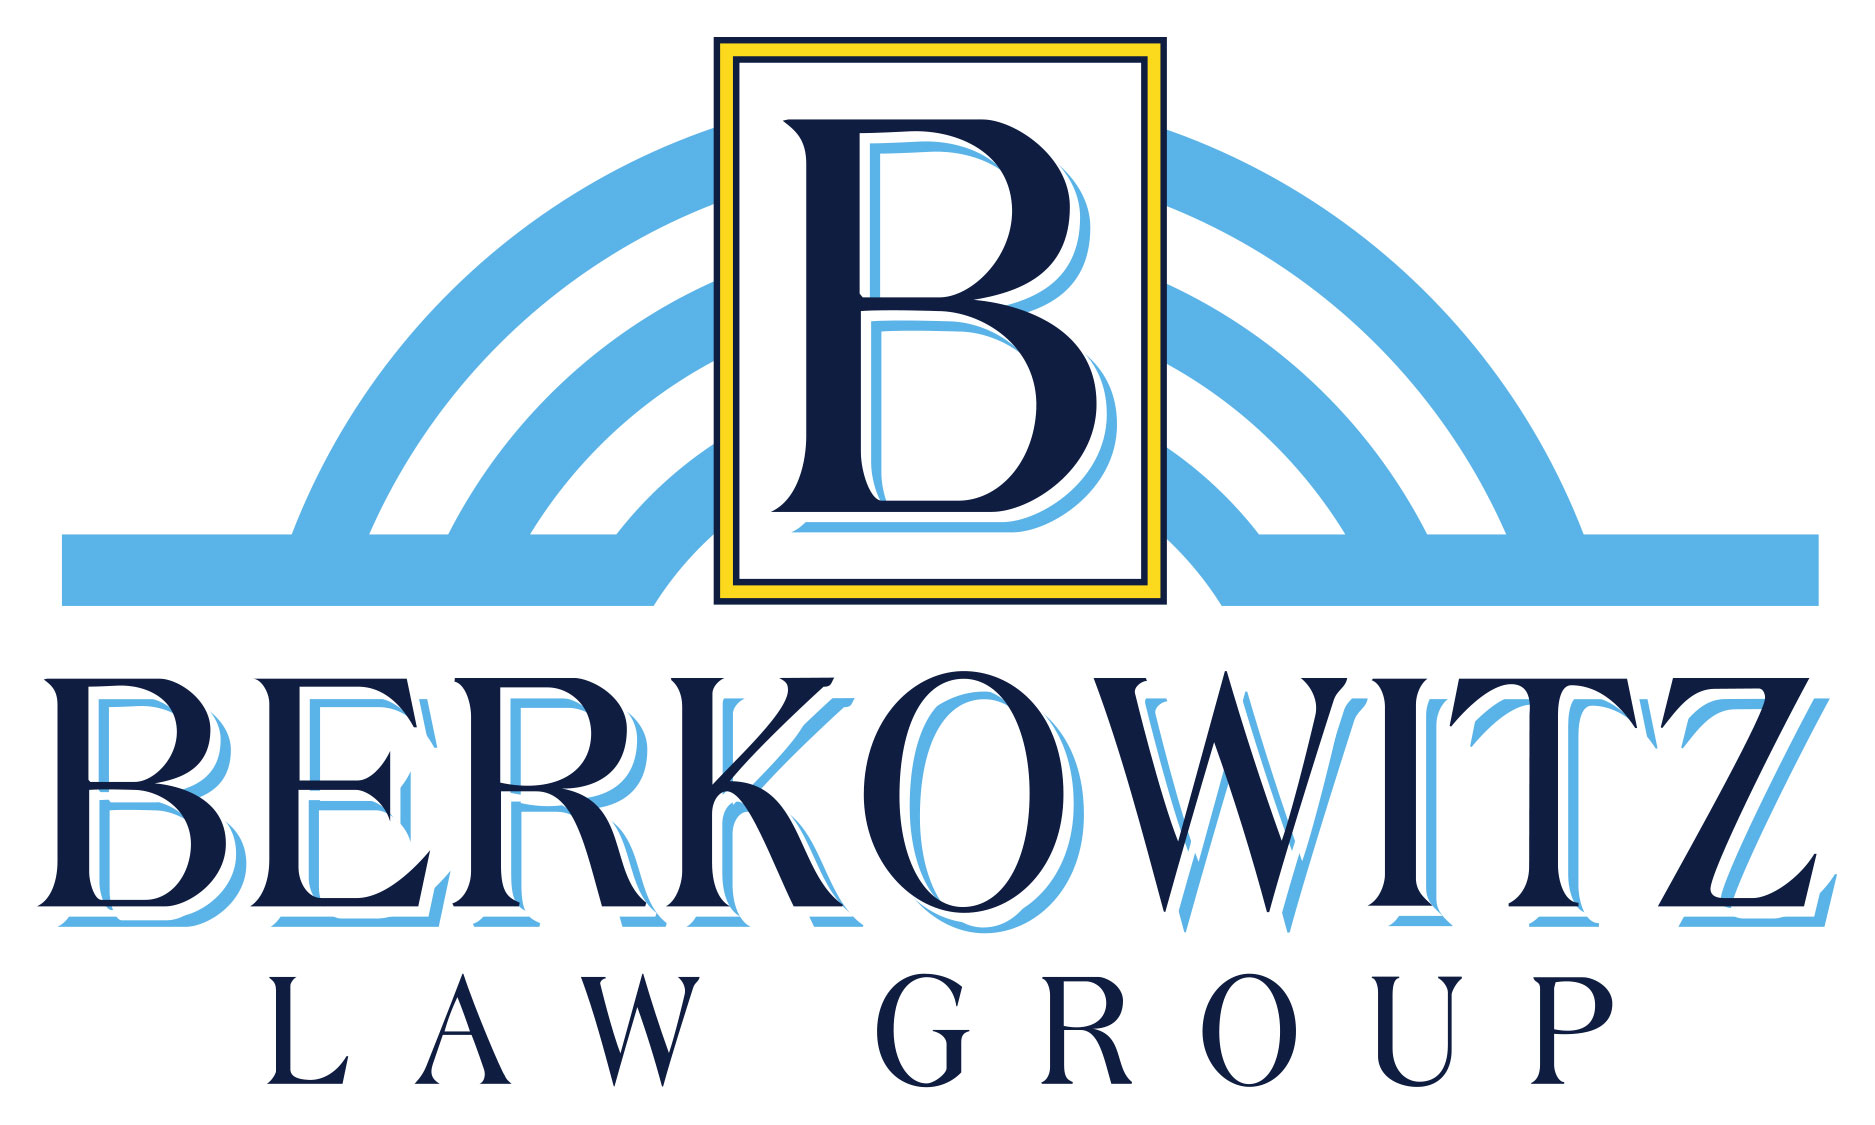 Berkowitz Law Group, P.A.'